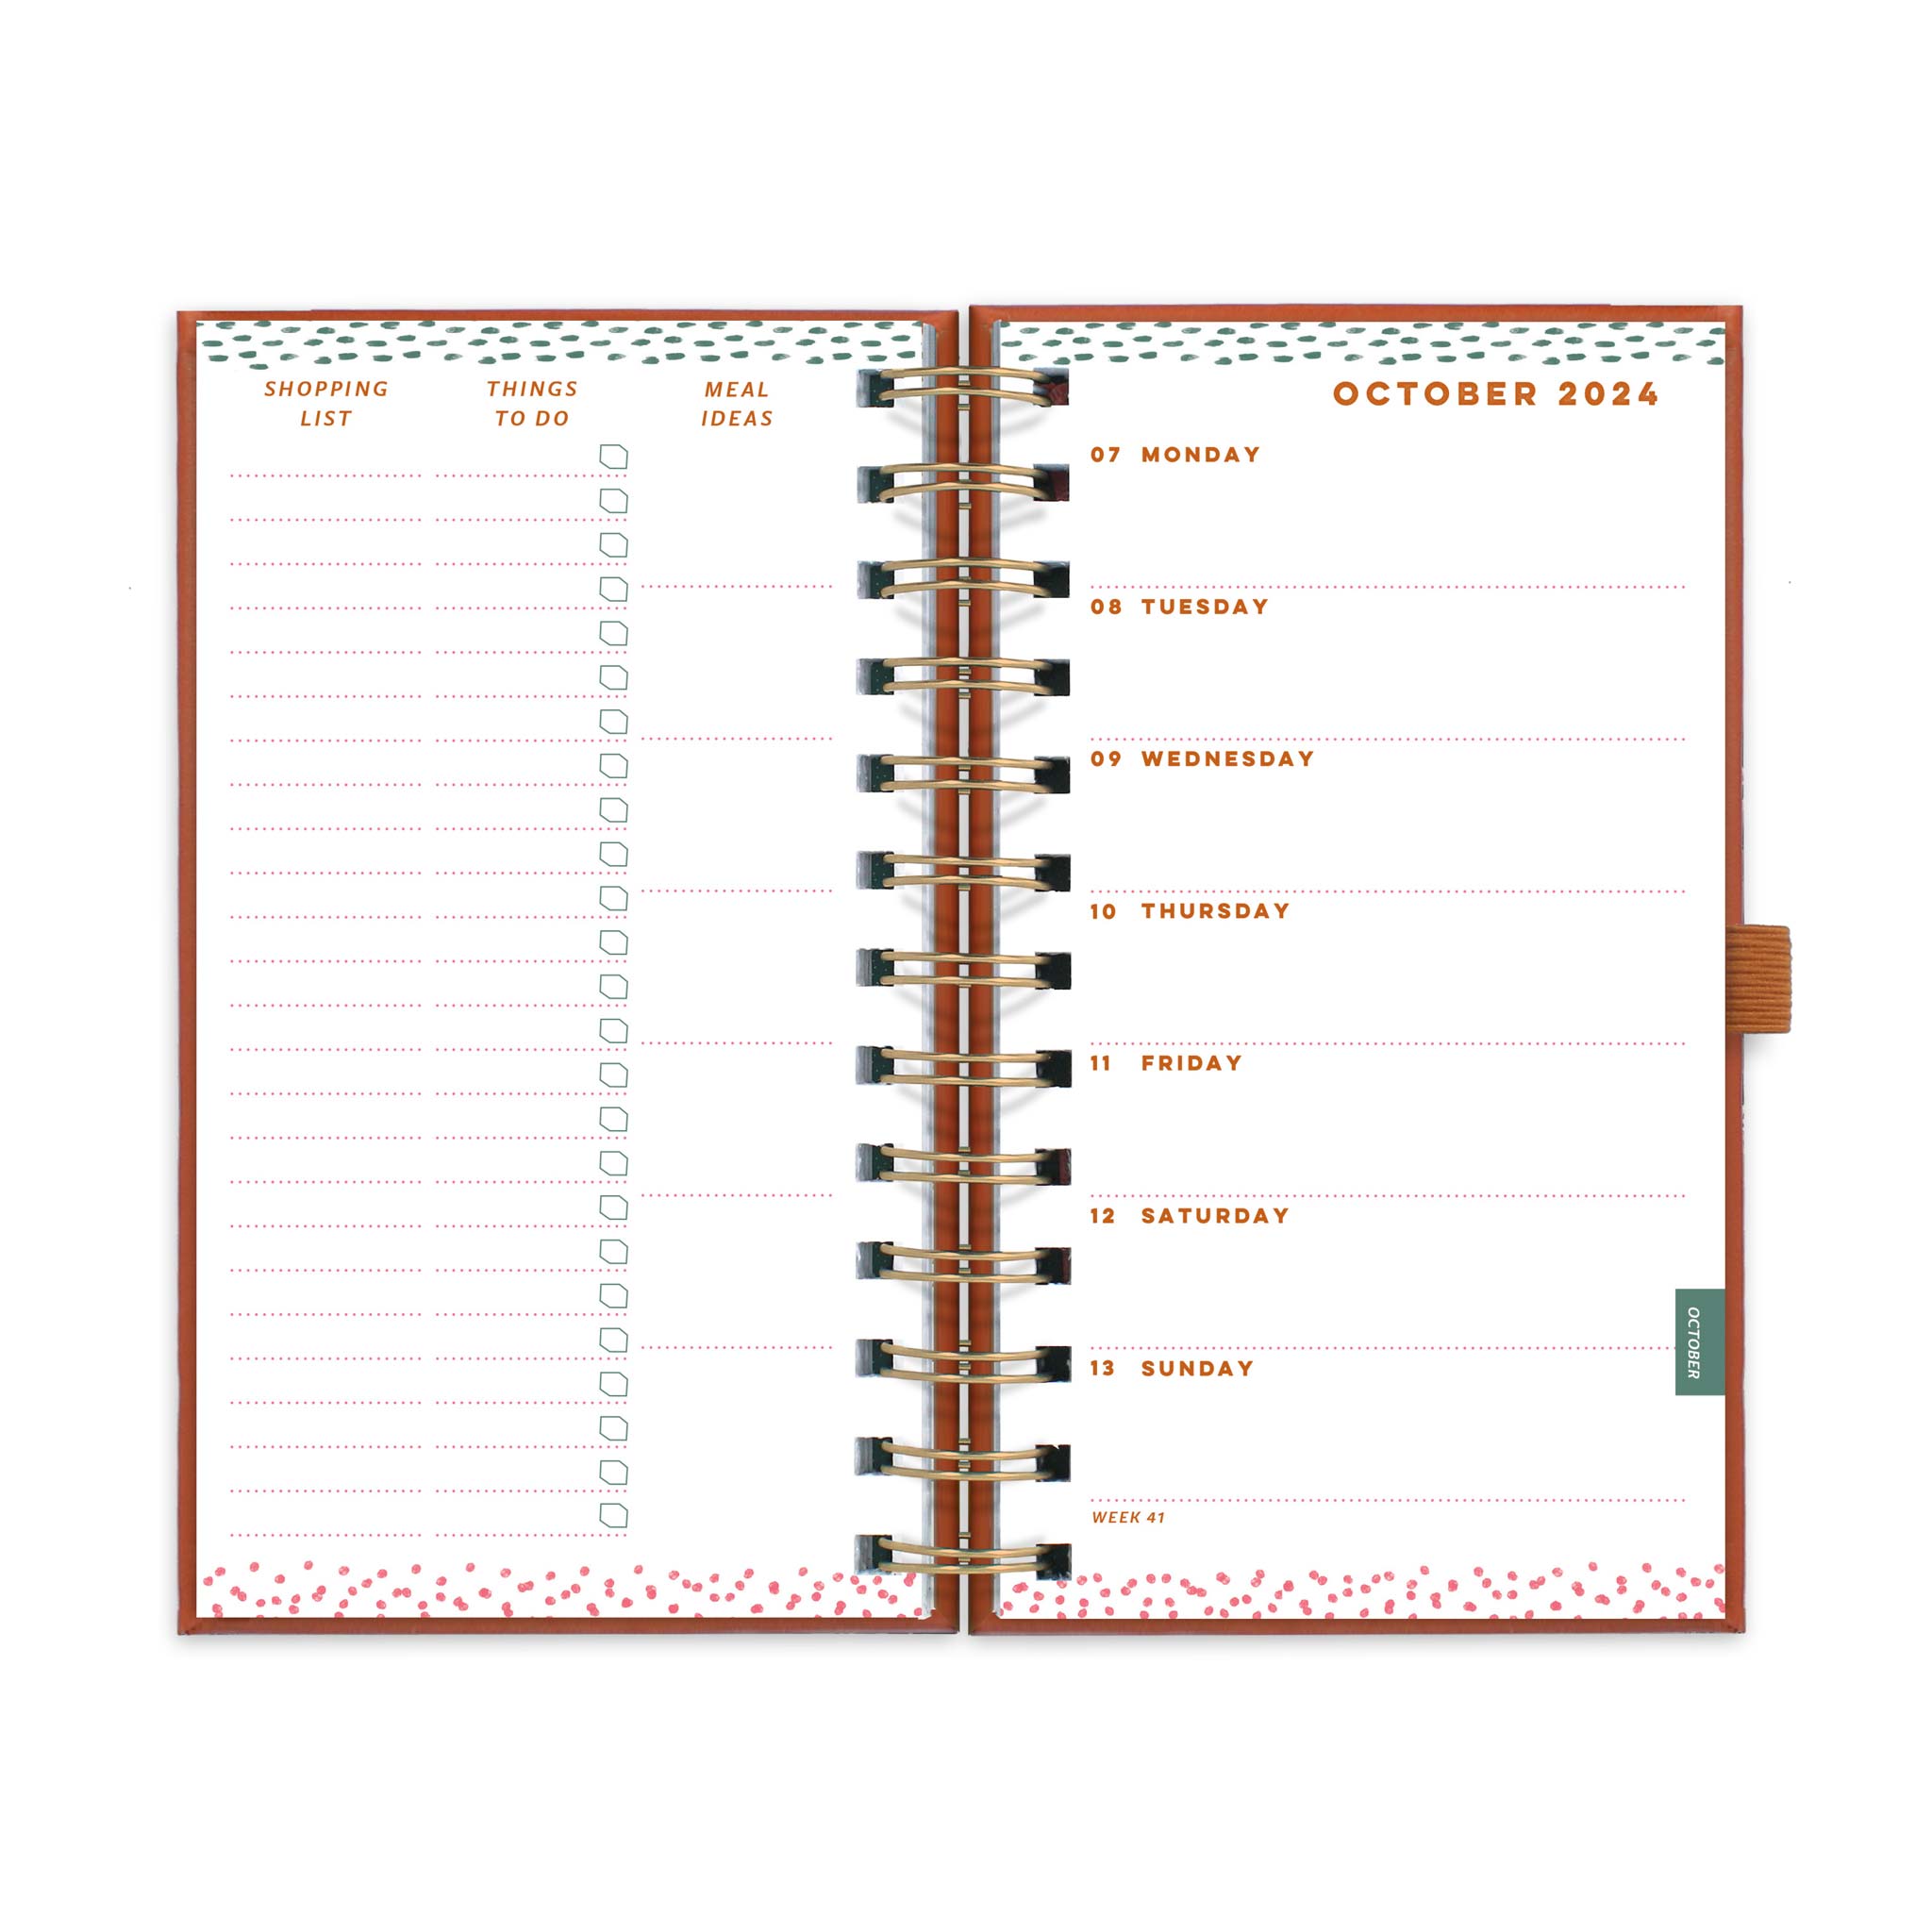 A week to view double page diary spread with a diary page on the right and lists for shopping, to dos and meals on the left